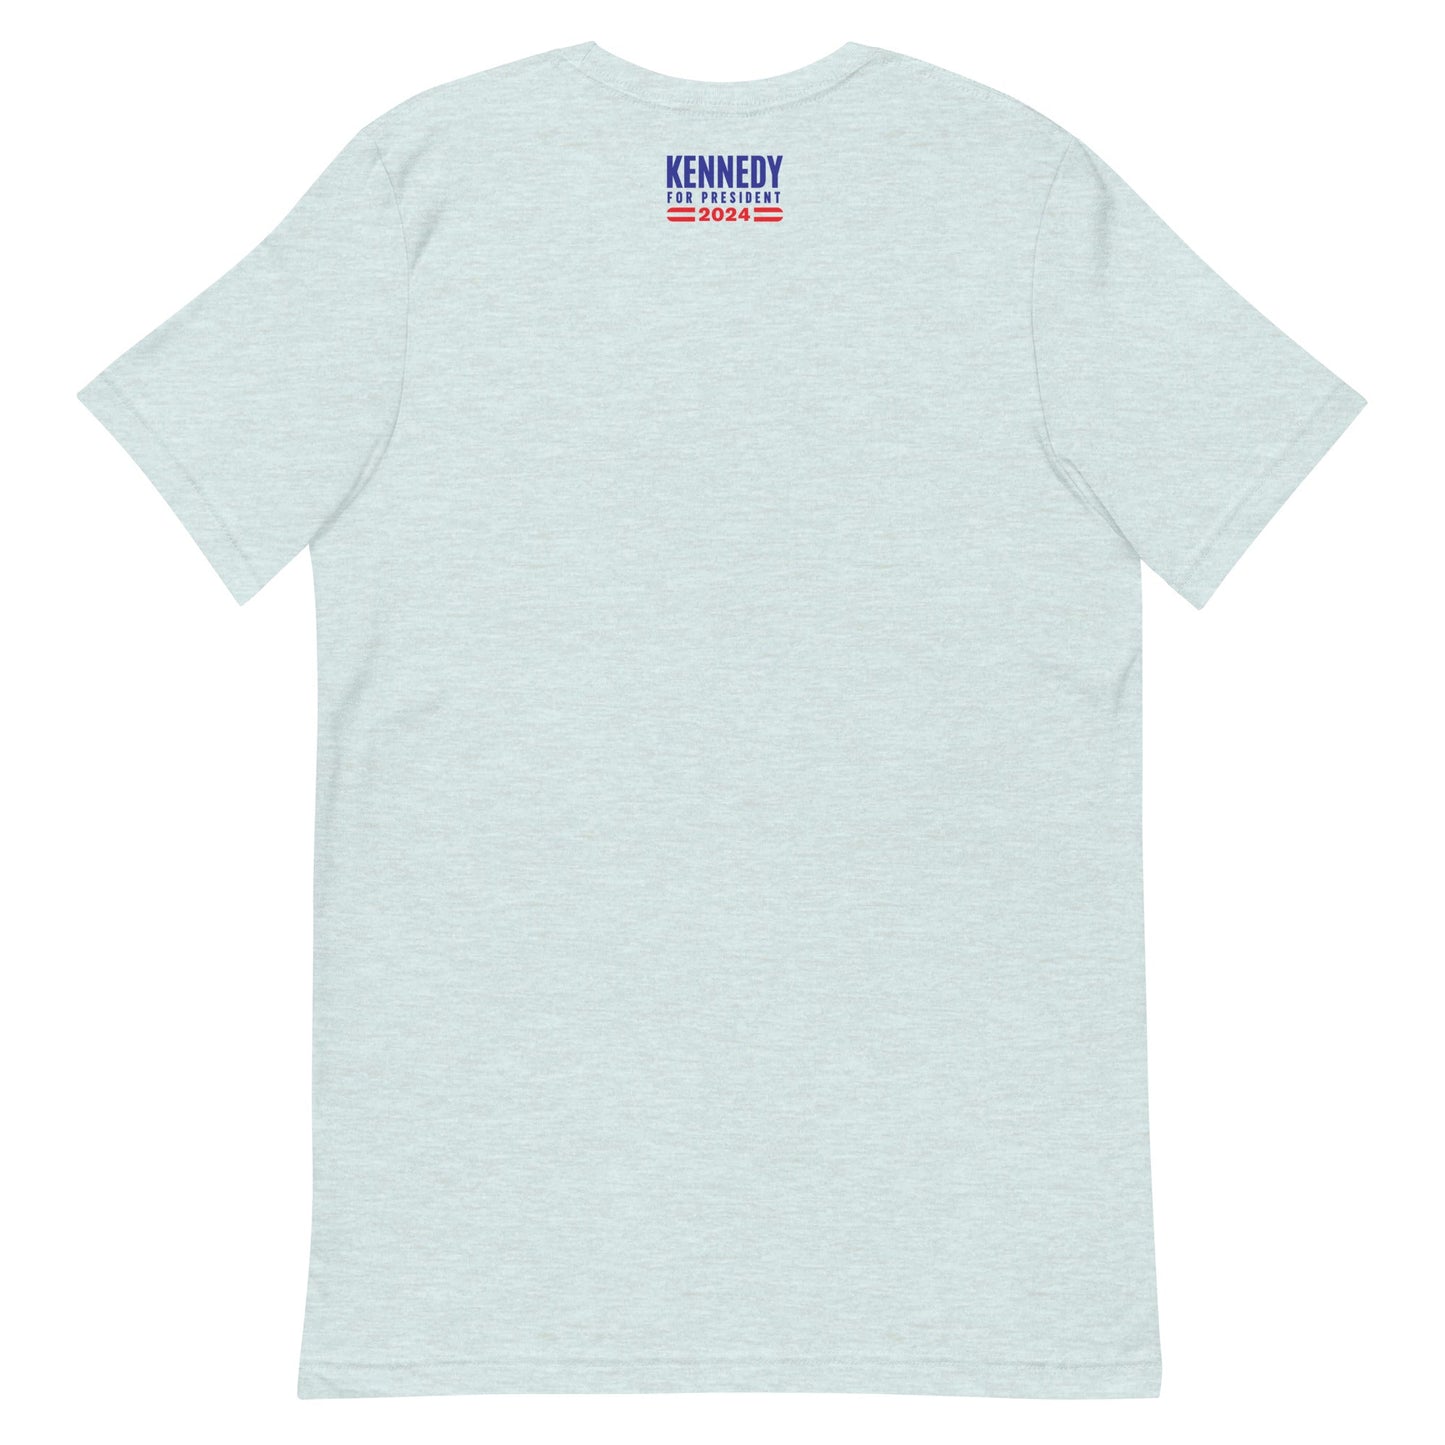 Navy for Kennedy Unisex Tee - TEAM KENNEDY. All rights reserved